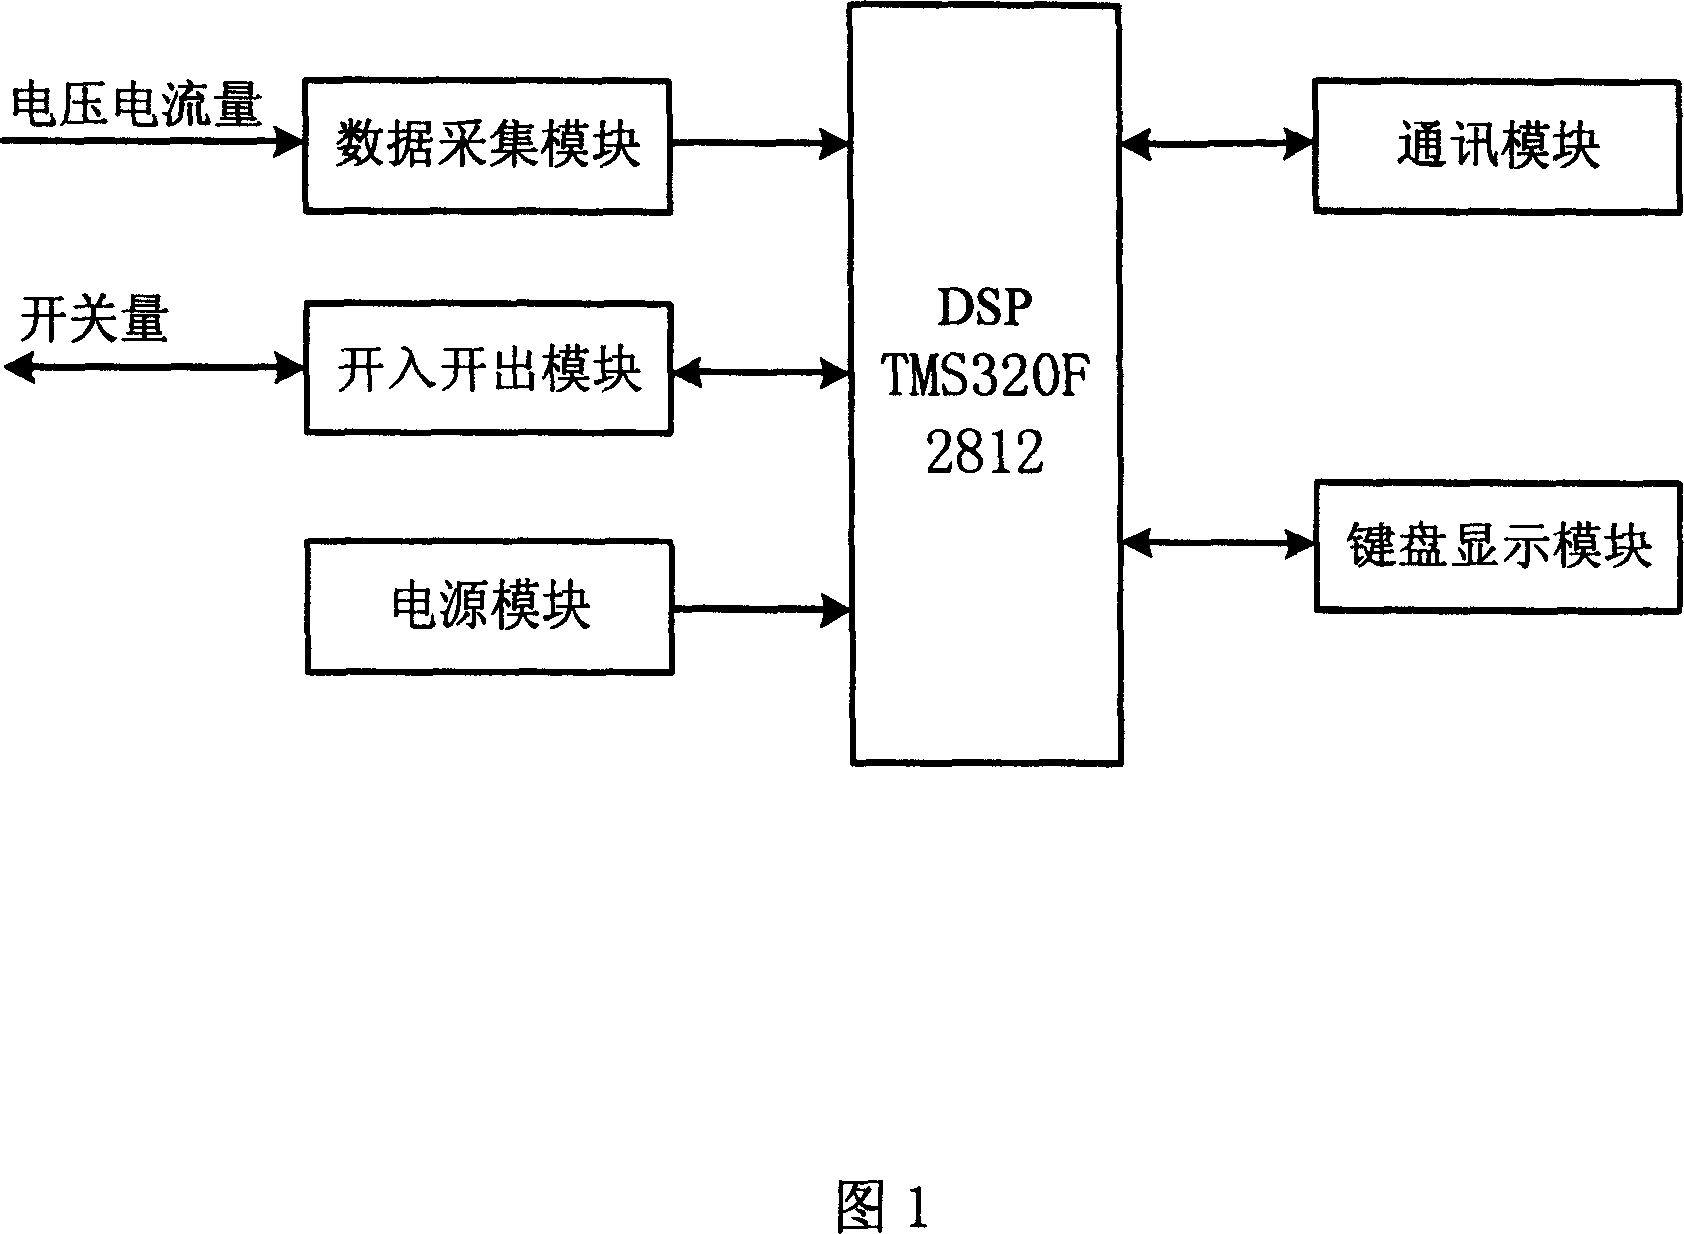 DSP relay protection control system based on small wave theory and its working method